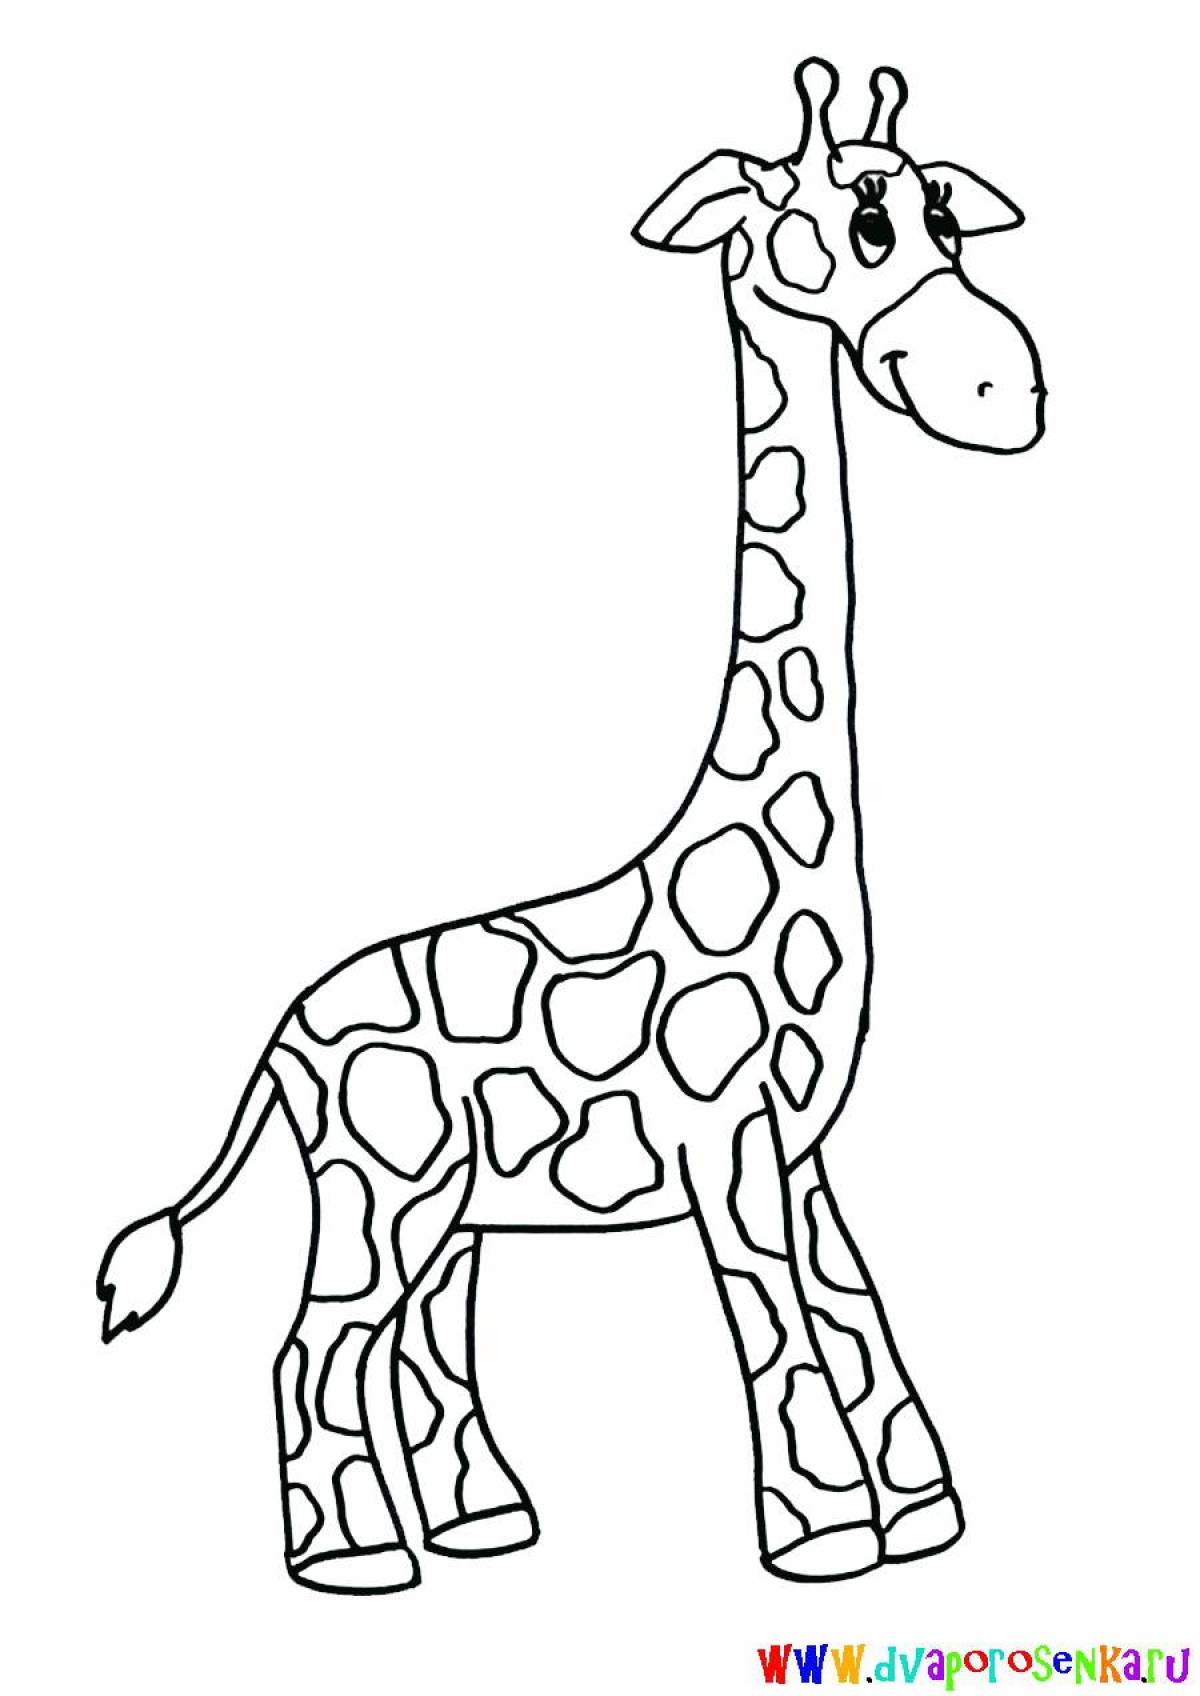 Awesome giraffe coloring pages for kids